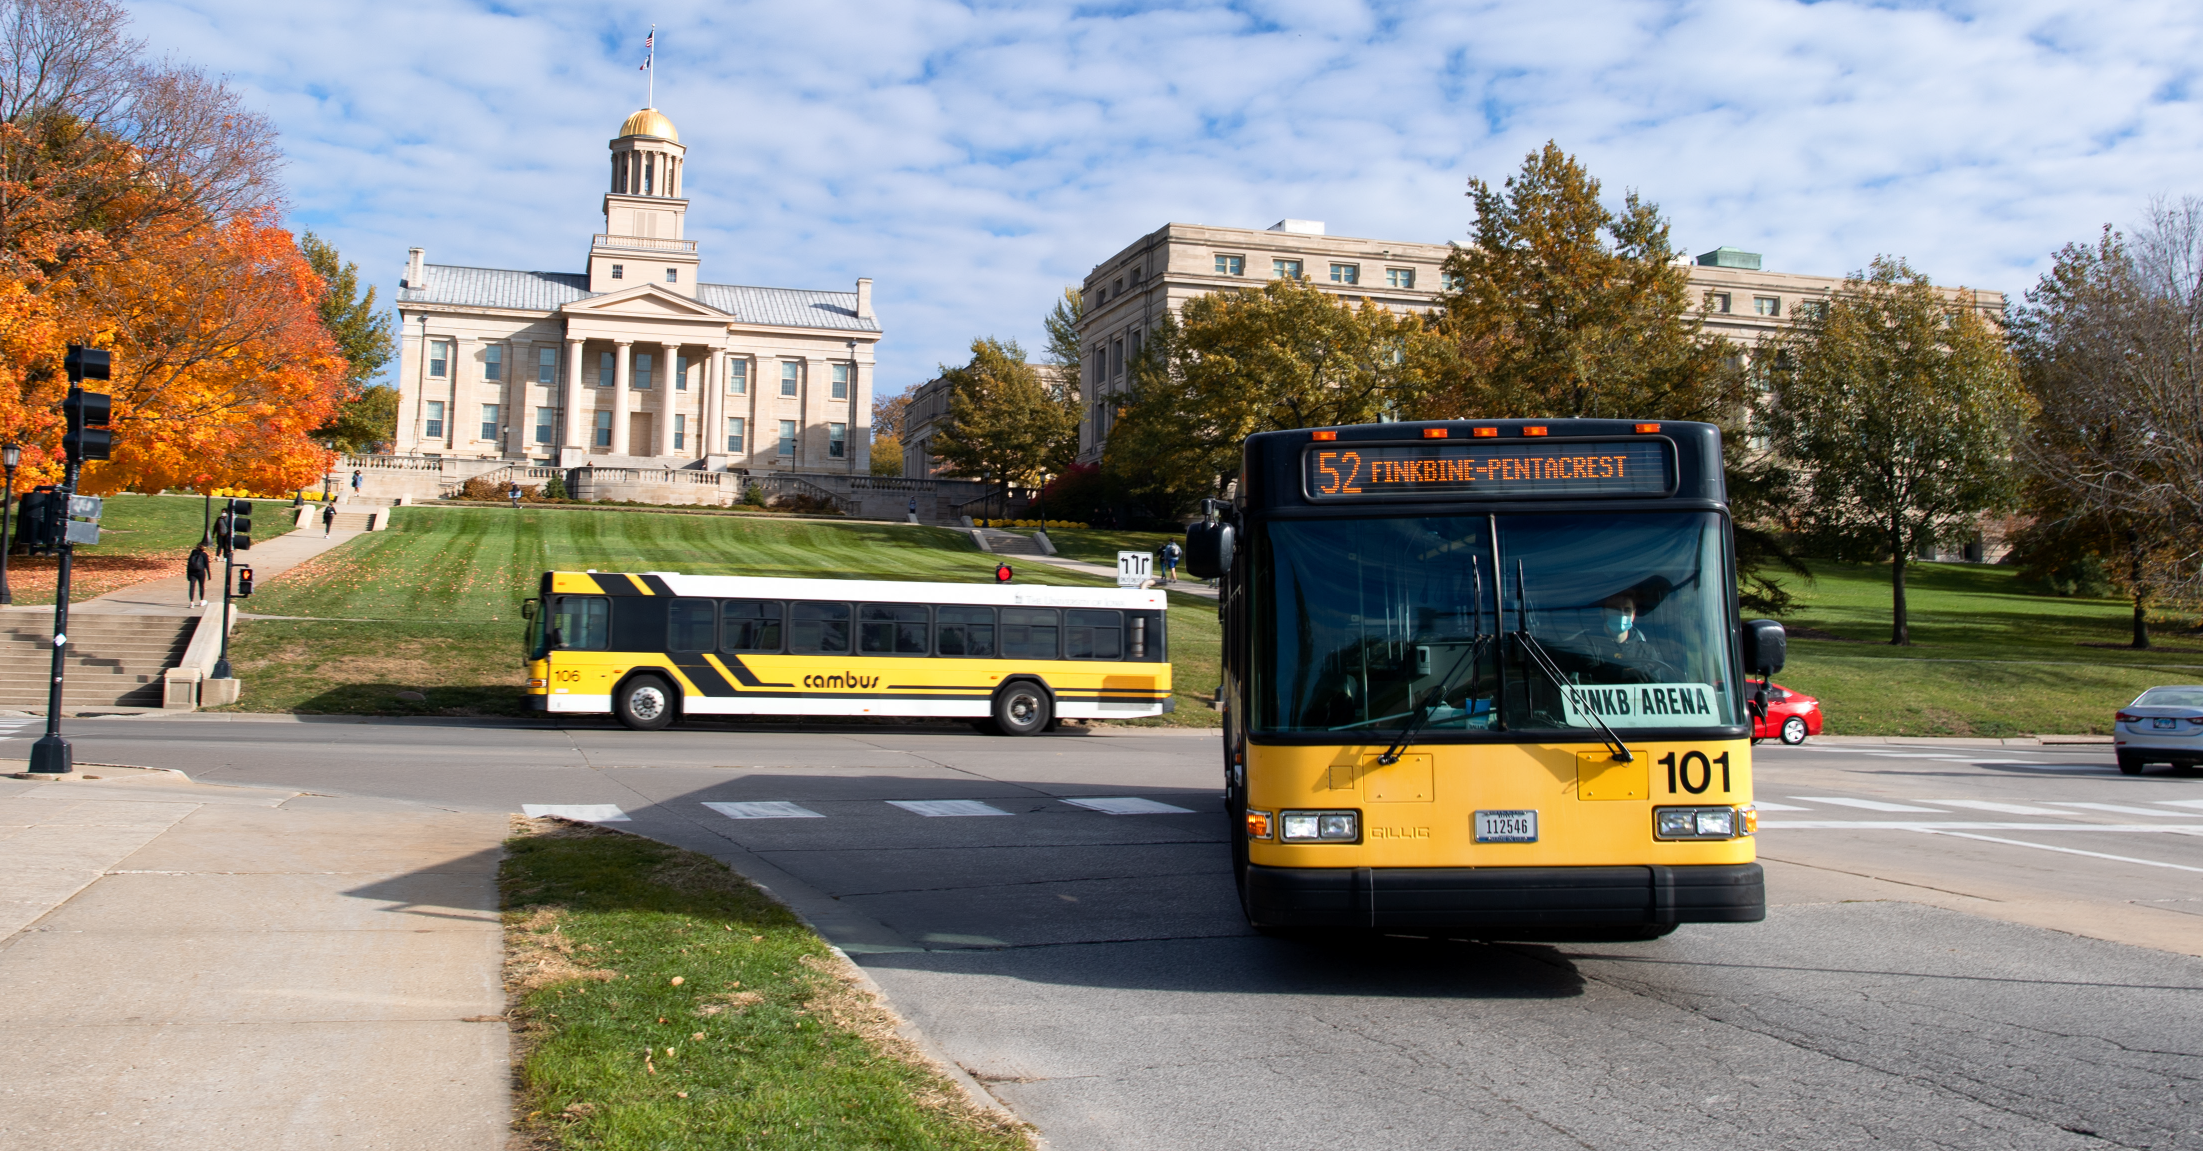 two CAMBUS drive in front of the old capitol in Iowa City